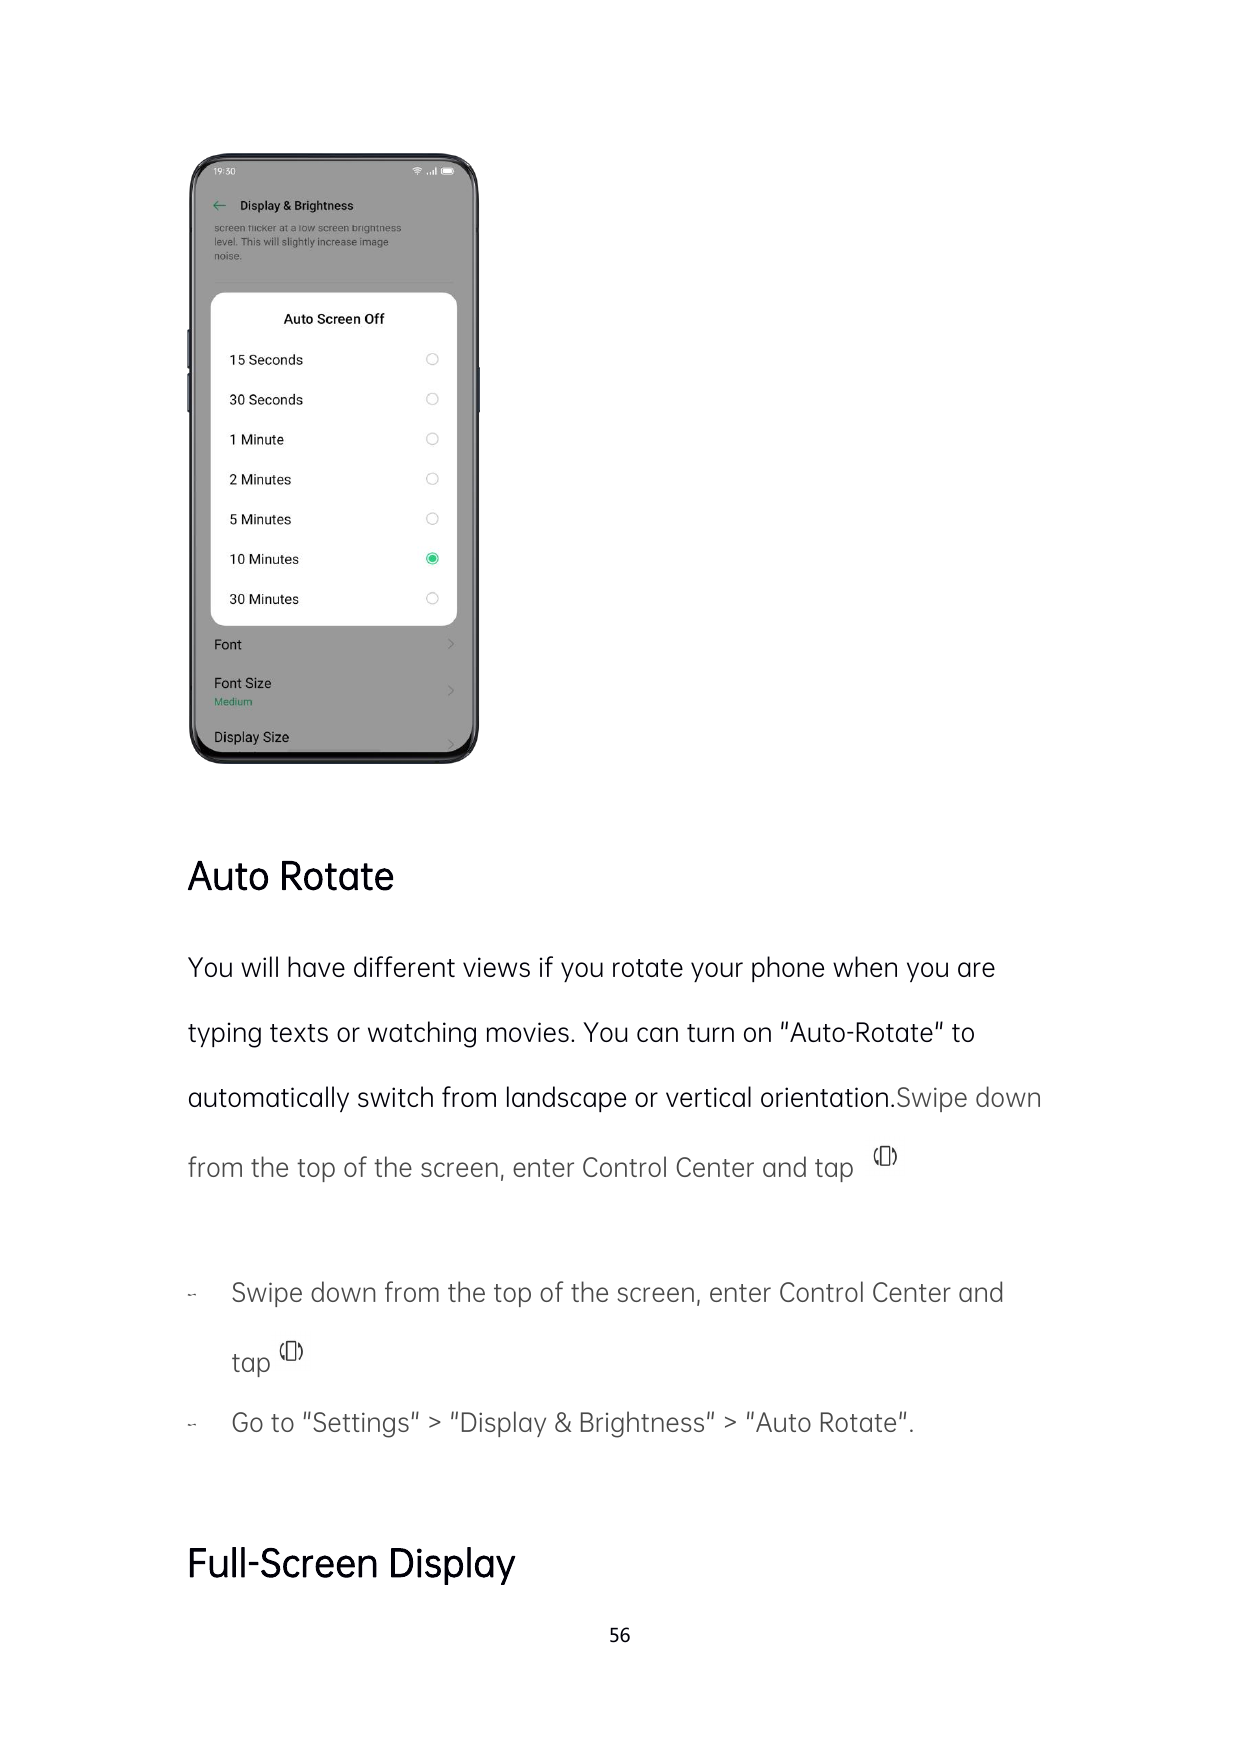 Auto RotateYou will have different views if you rotate your phone when you aretyping texts or watching movies. You can turn on "